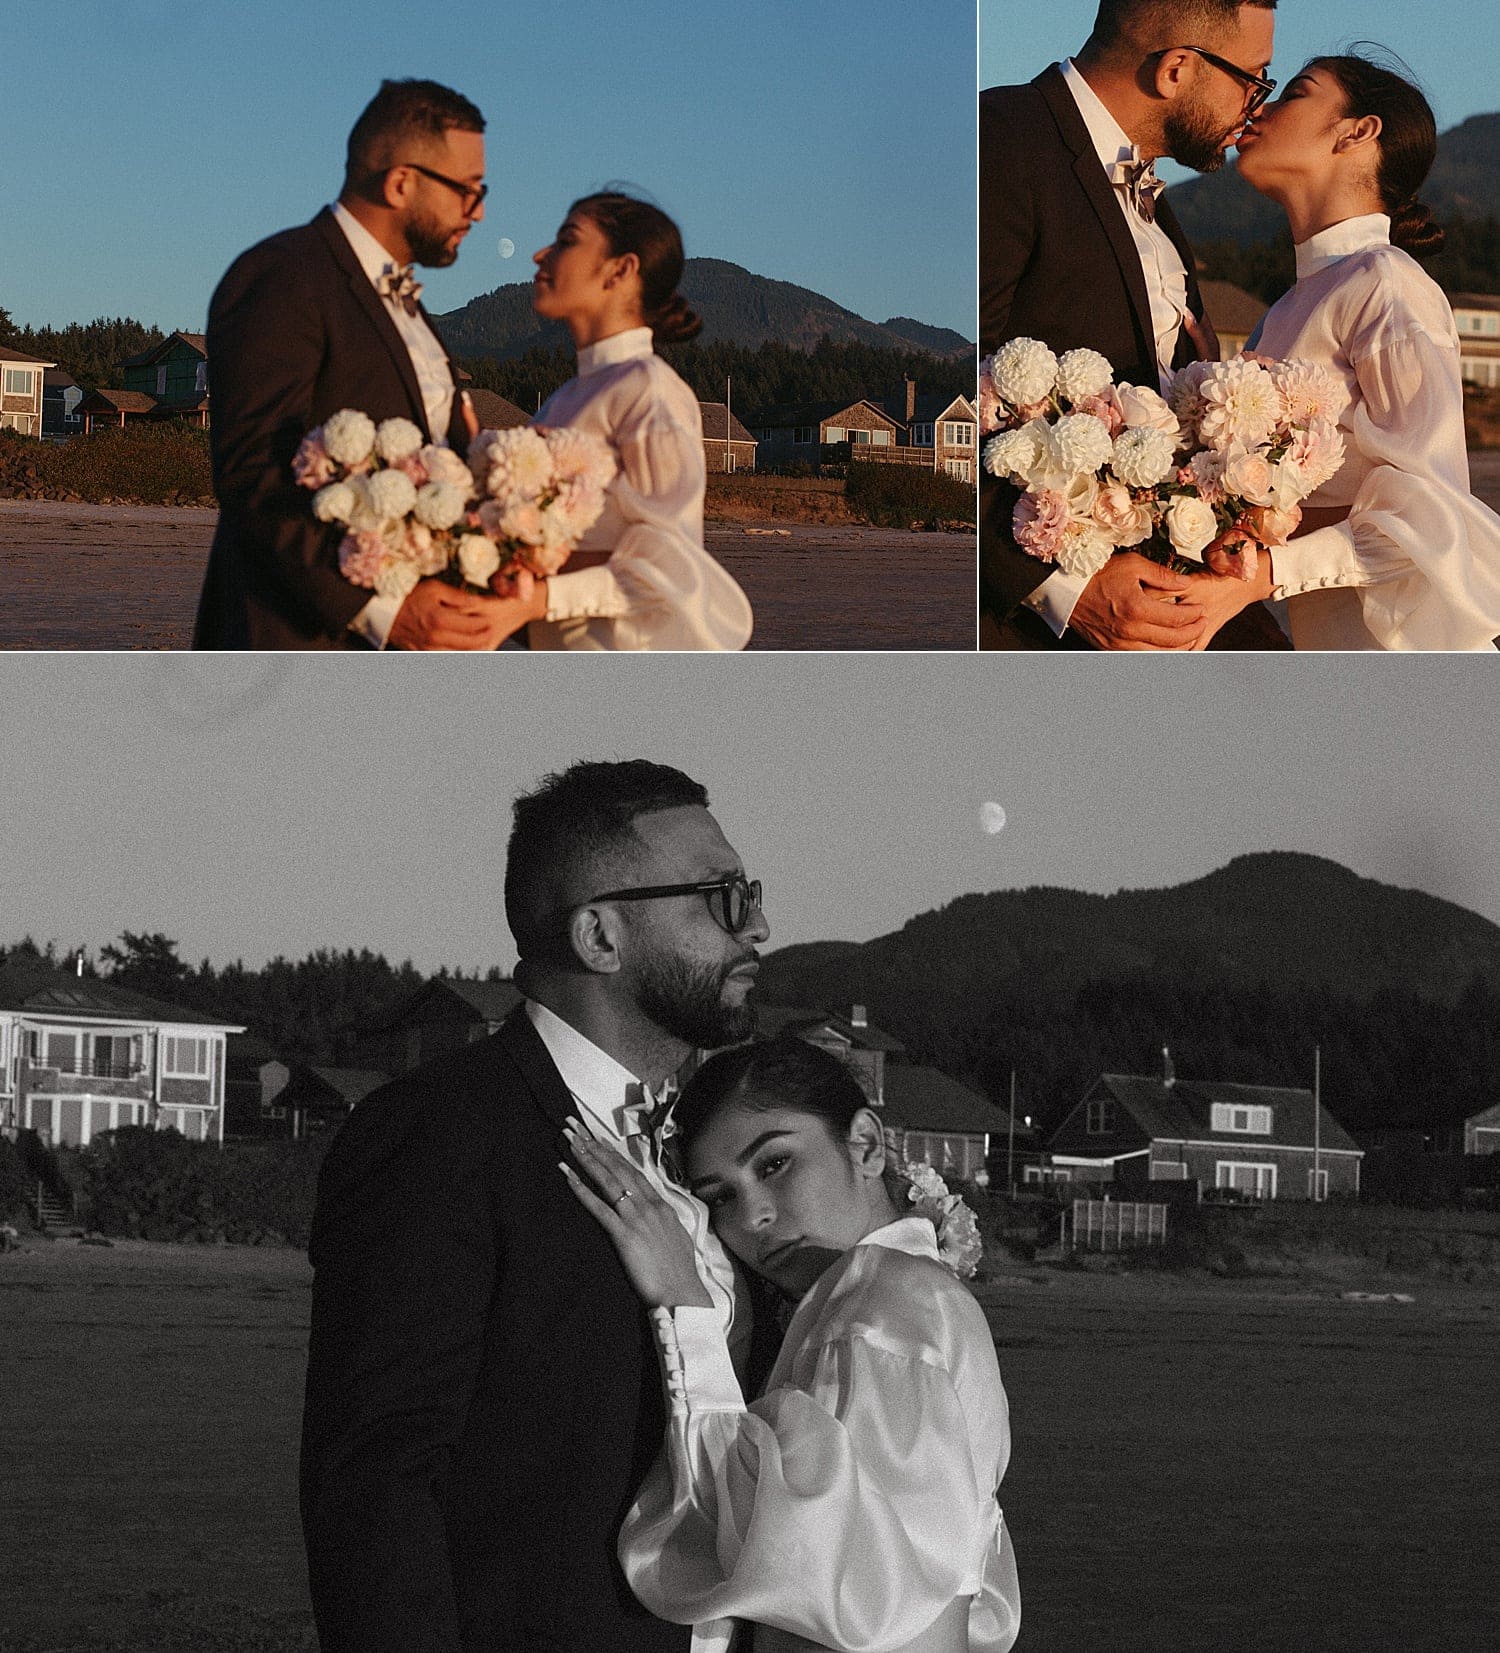 dreamy portraits of newlywed couple with the moon in the background for their cannon beach elopement captured by marcela pulido portland oregon wedding photographer